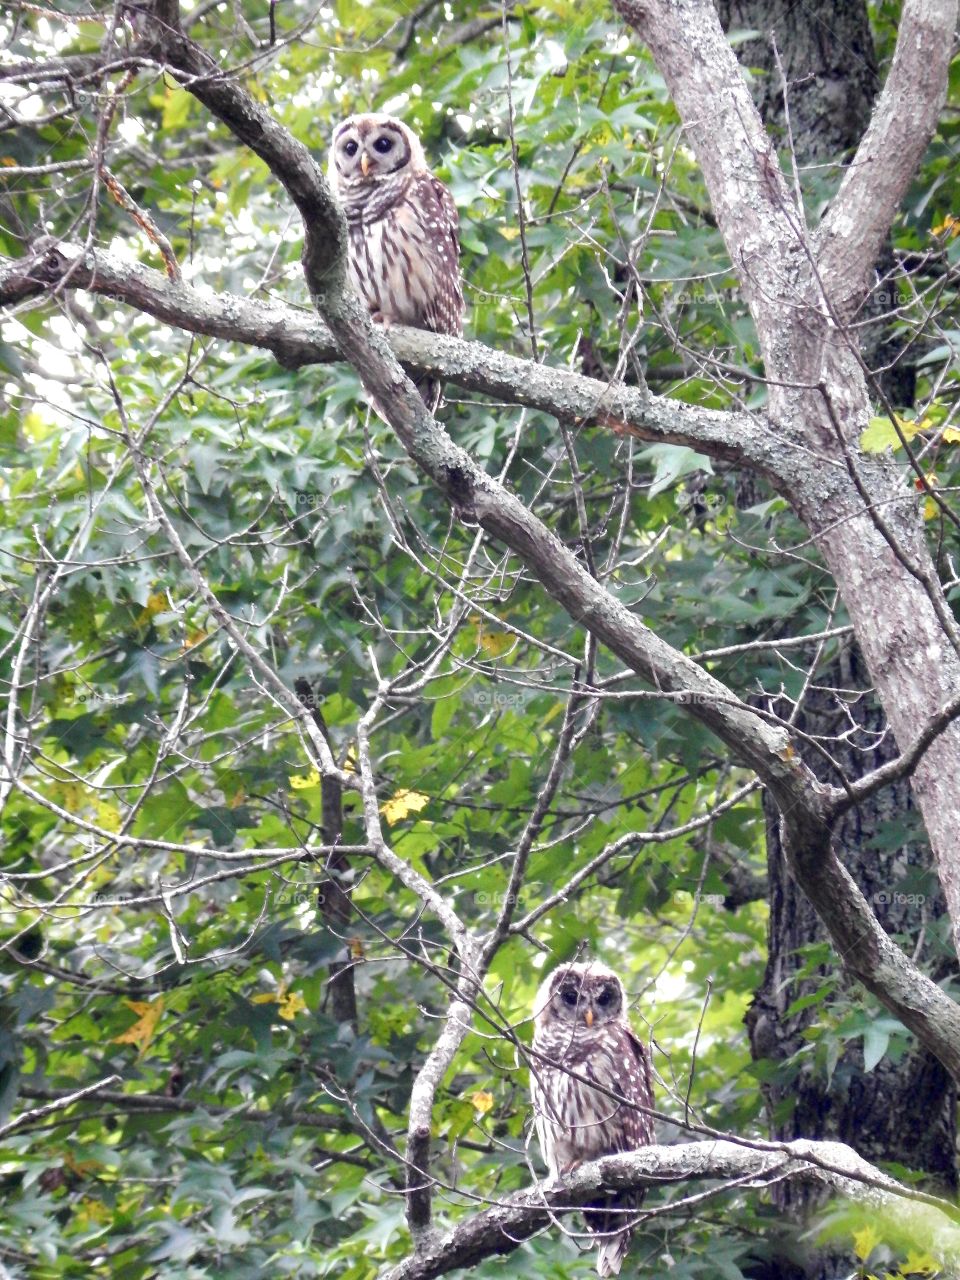 Two owls in the wild